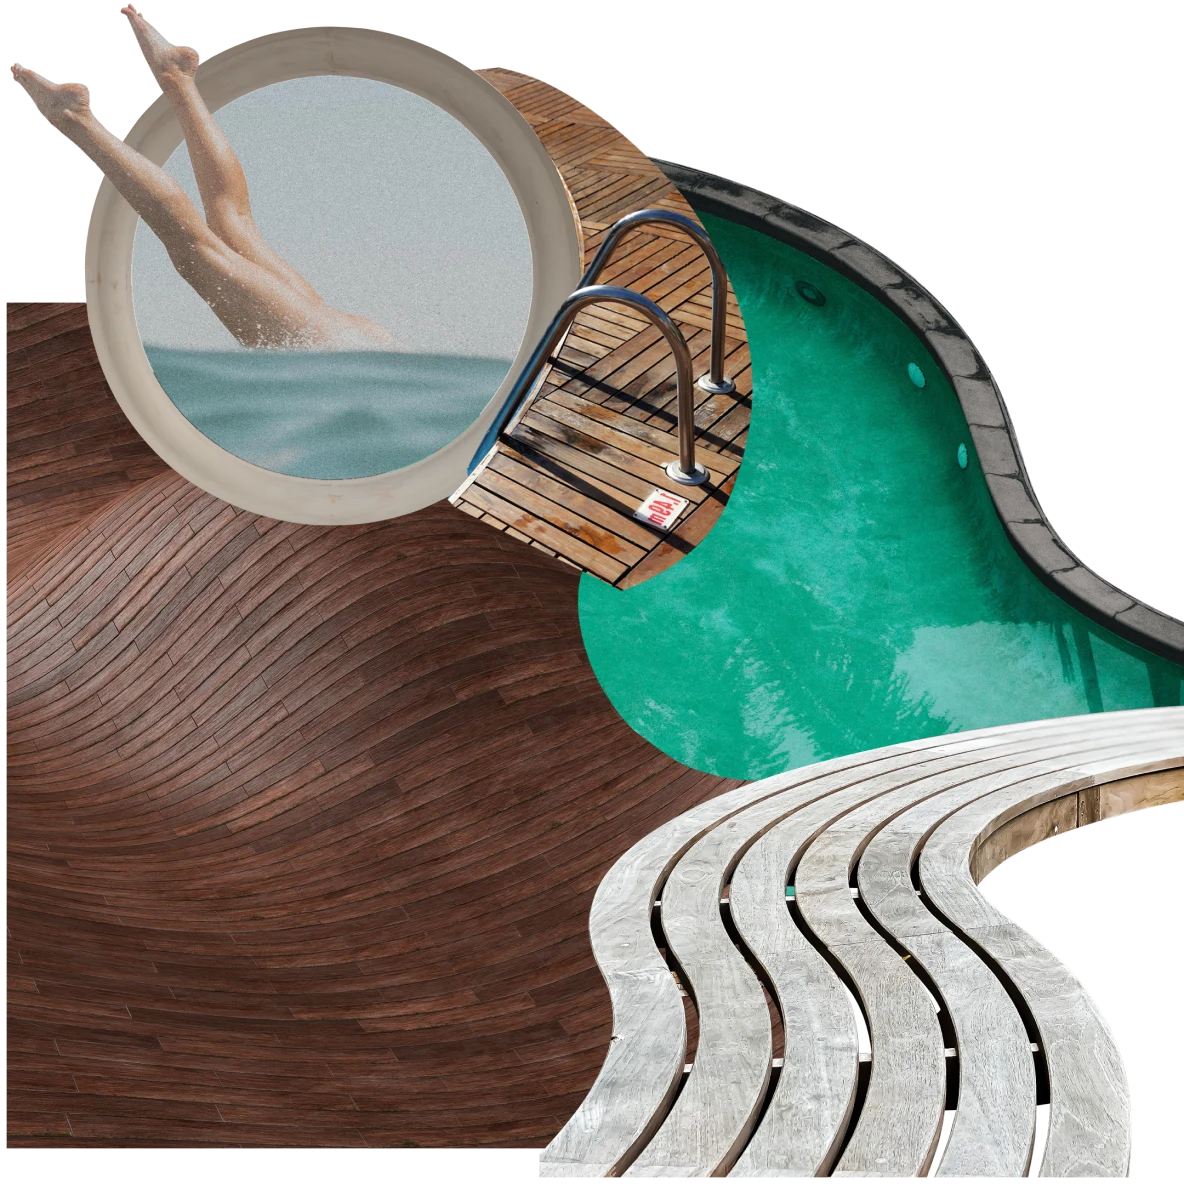 Collage of pool-themed items. Legs diving into water inside a round hot tub, from an aerial view. Curved walkway, dark wood panel and swimming pool edge.